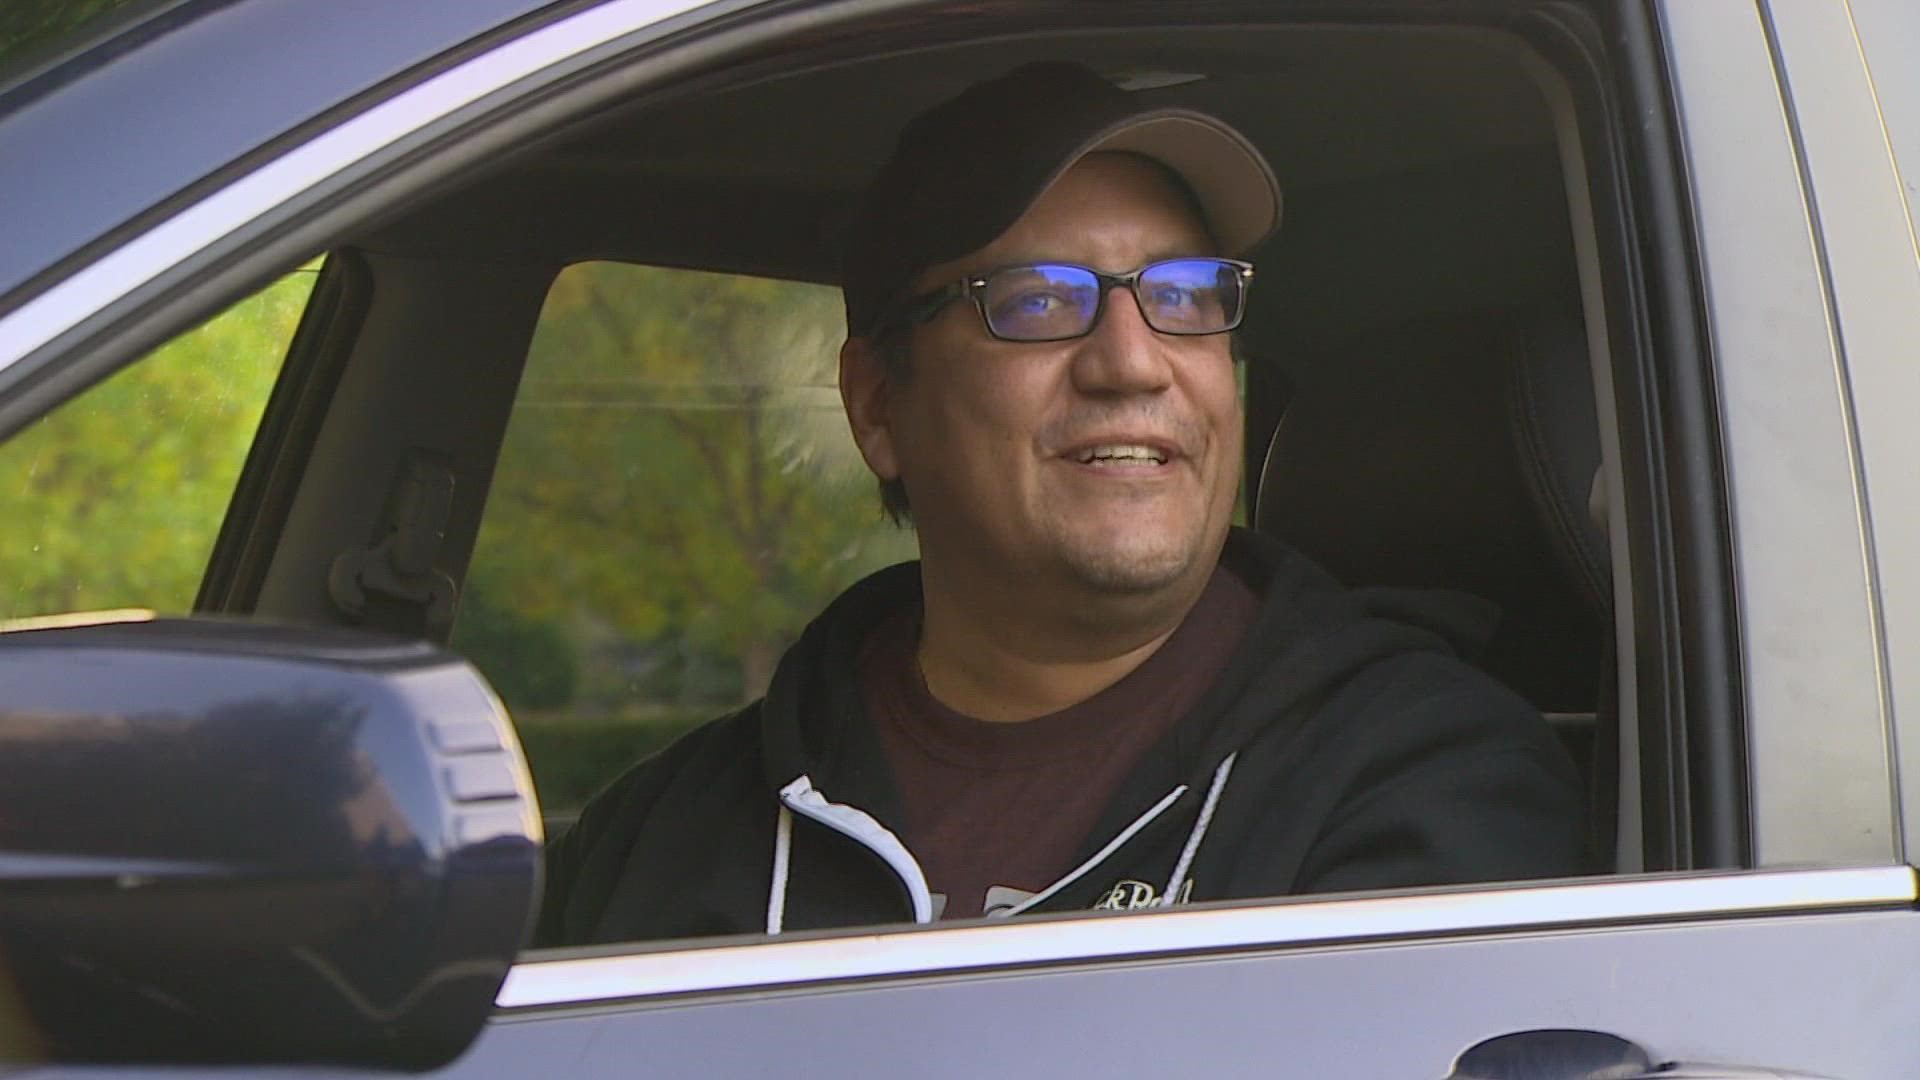 Delivery drivers say after driving for eight hours and factoring in the cost of gas they can be left with $20 leaving some to question if driving is worth it.